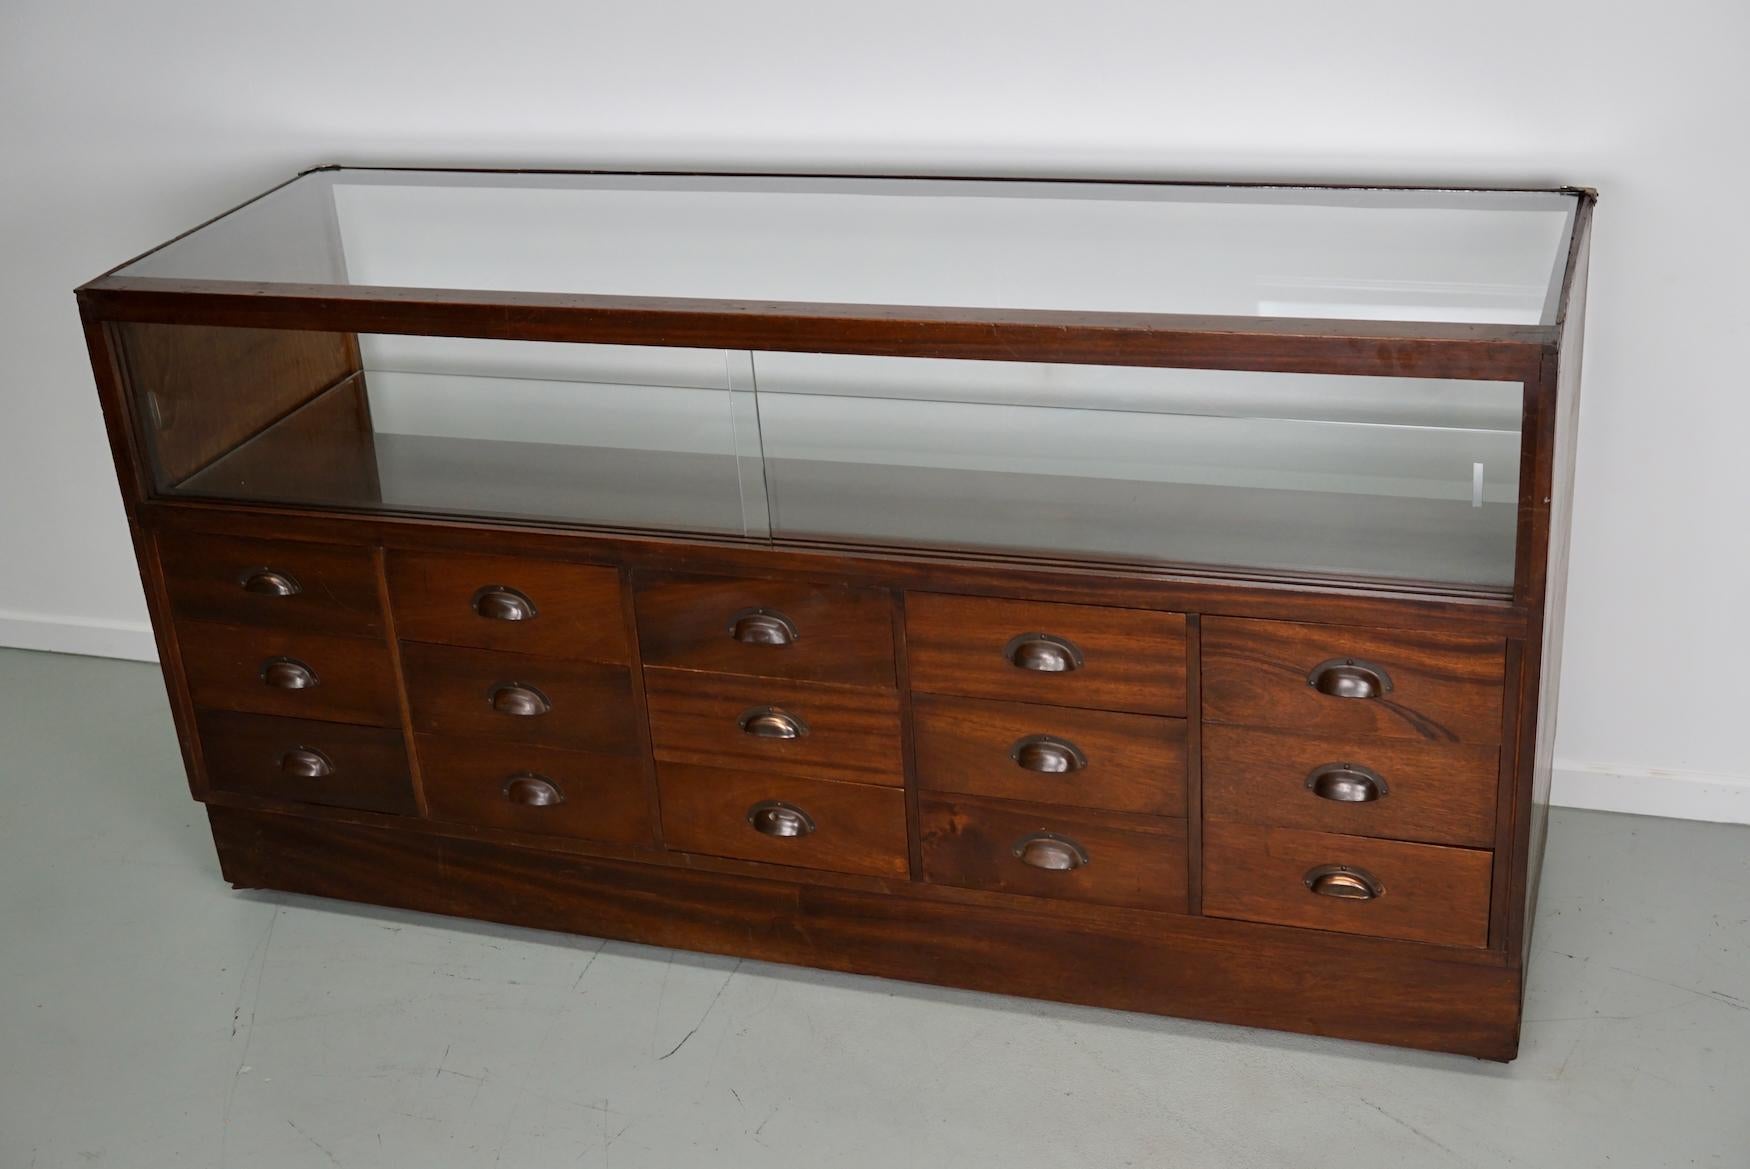 British Mahogany Haberdashery Cabinet or Shop Counter, 1940s For Sale 12